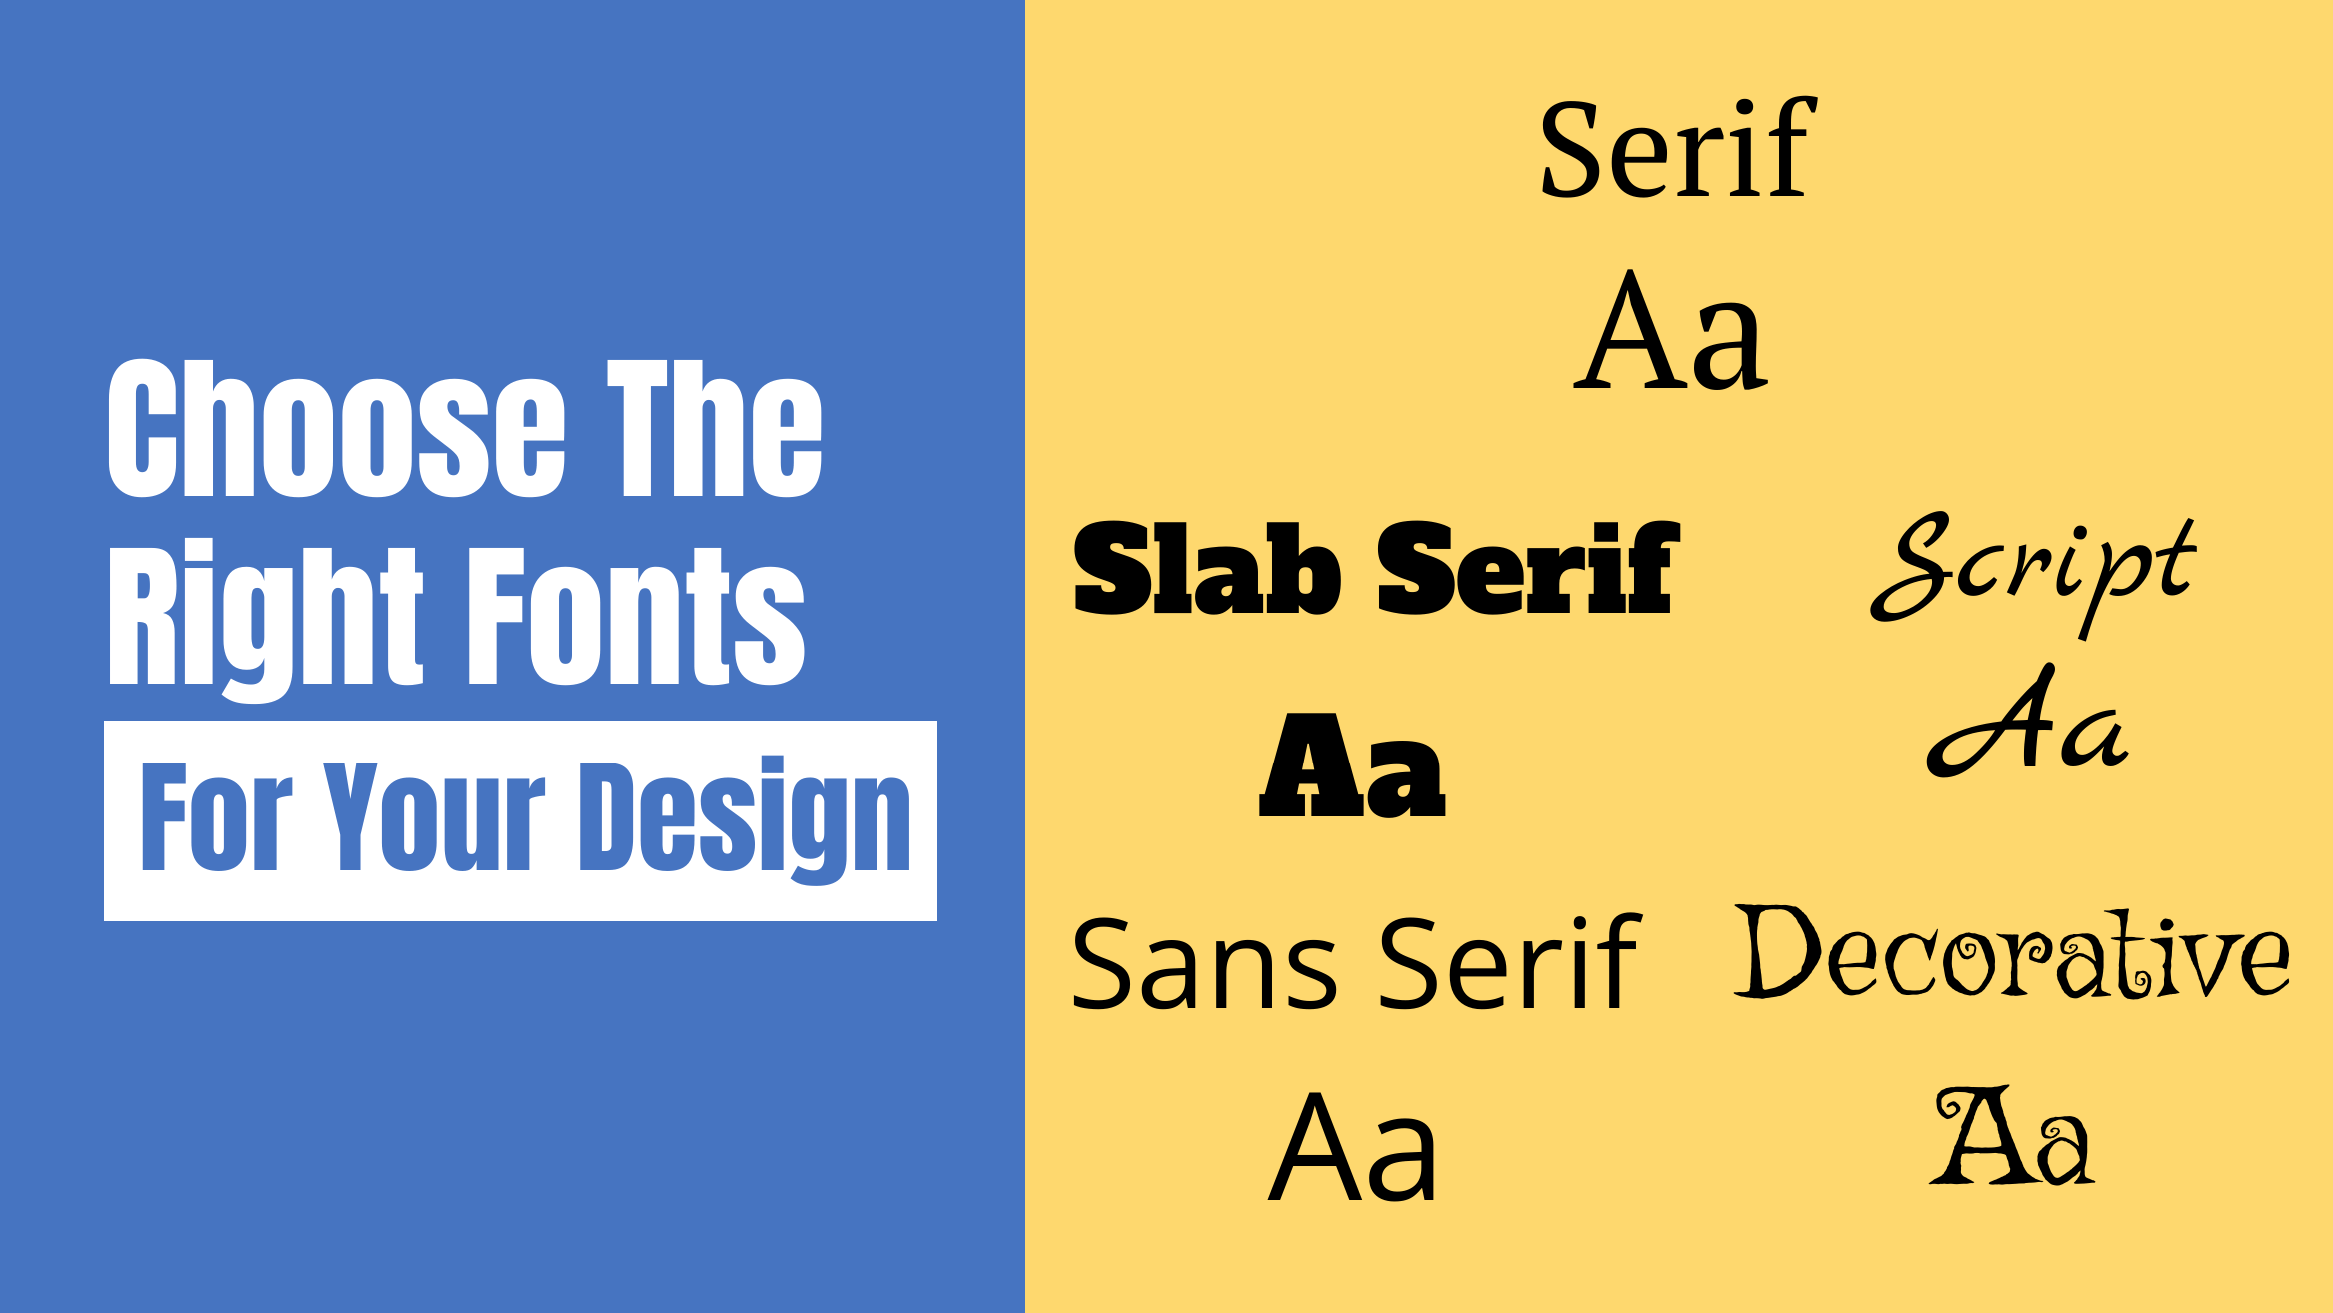 How To Choose Fonts